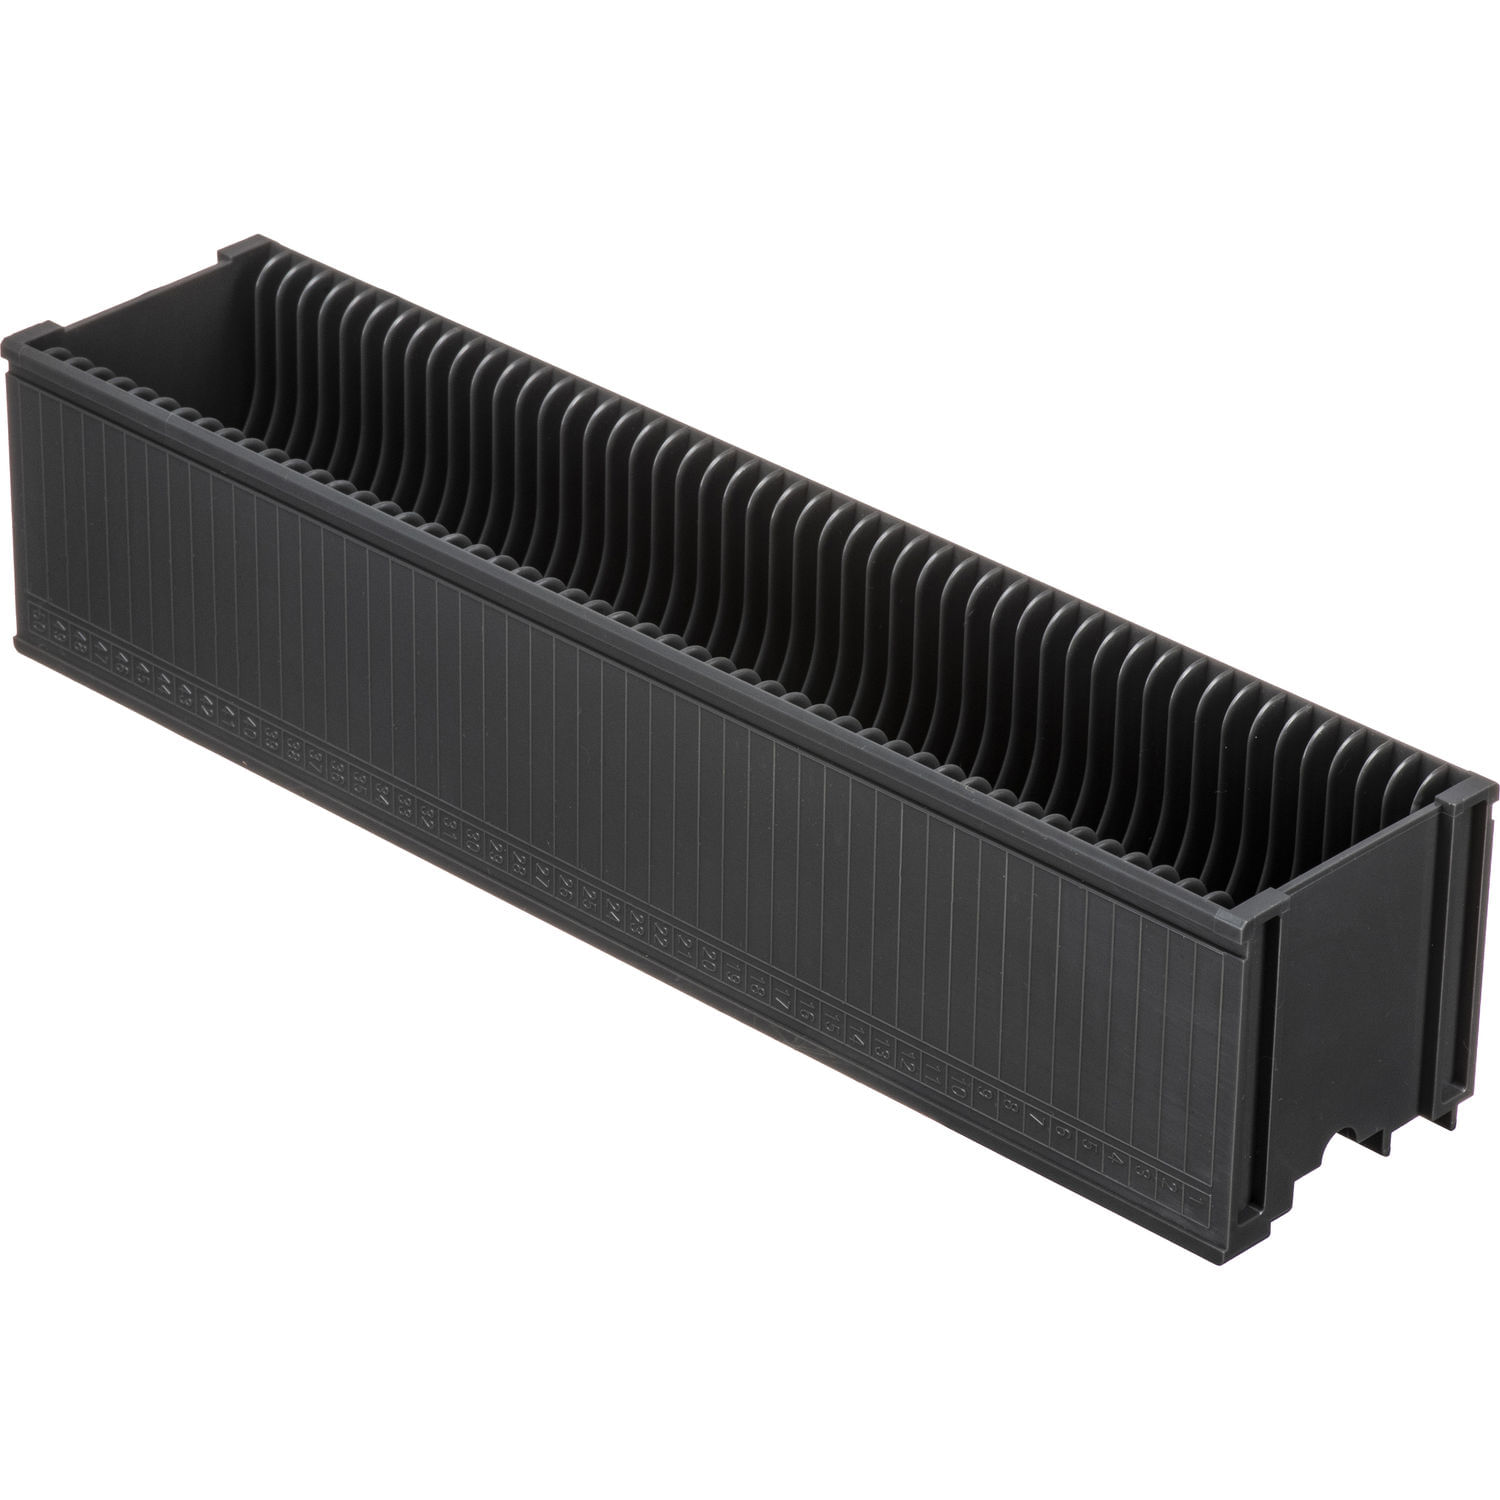 Pacific Image Slide Tray For Ps3600, Ps3650, Ps5000, And Ps X